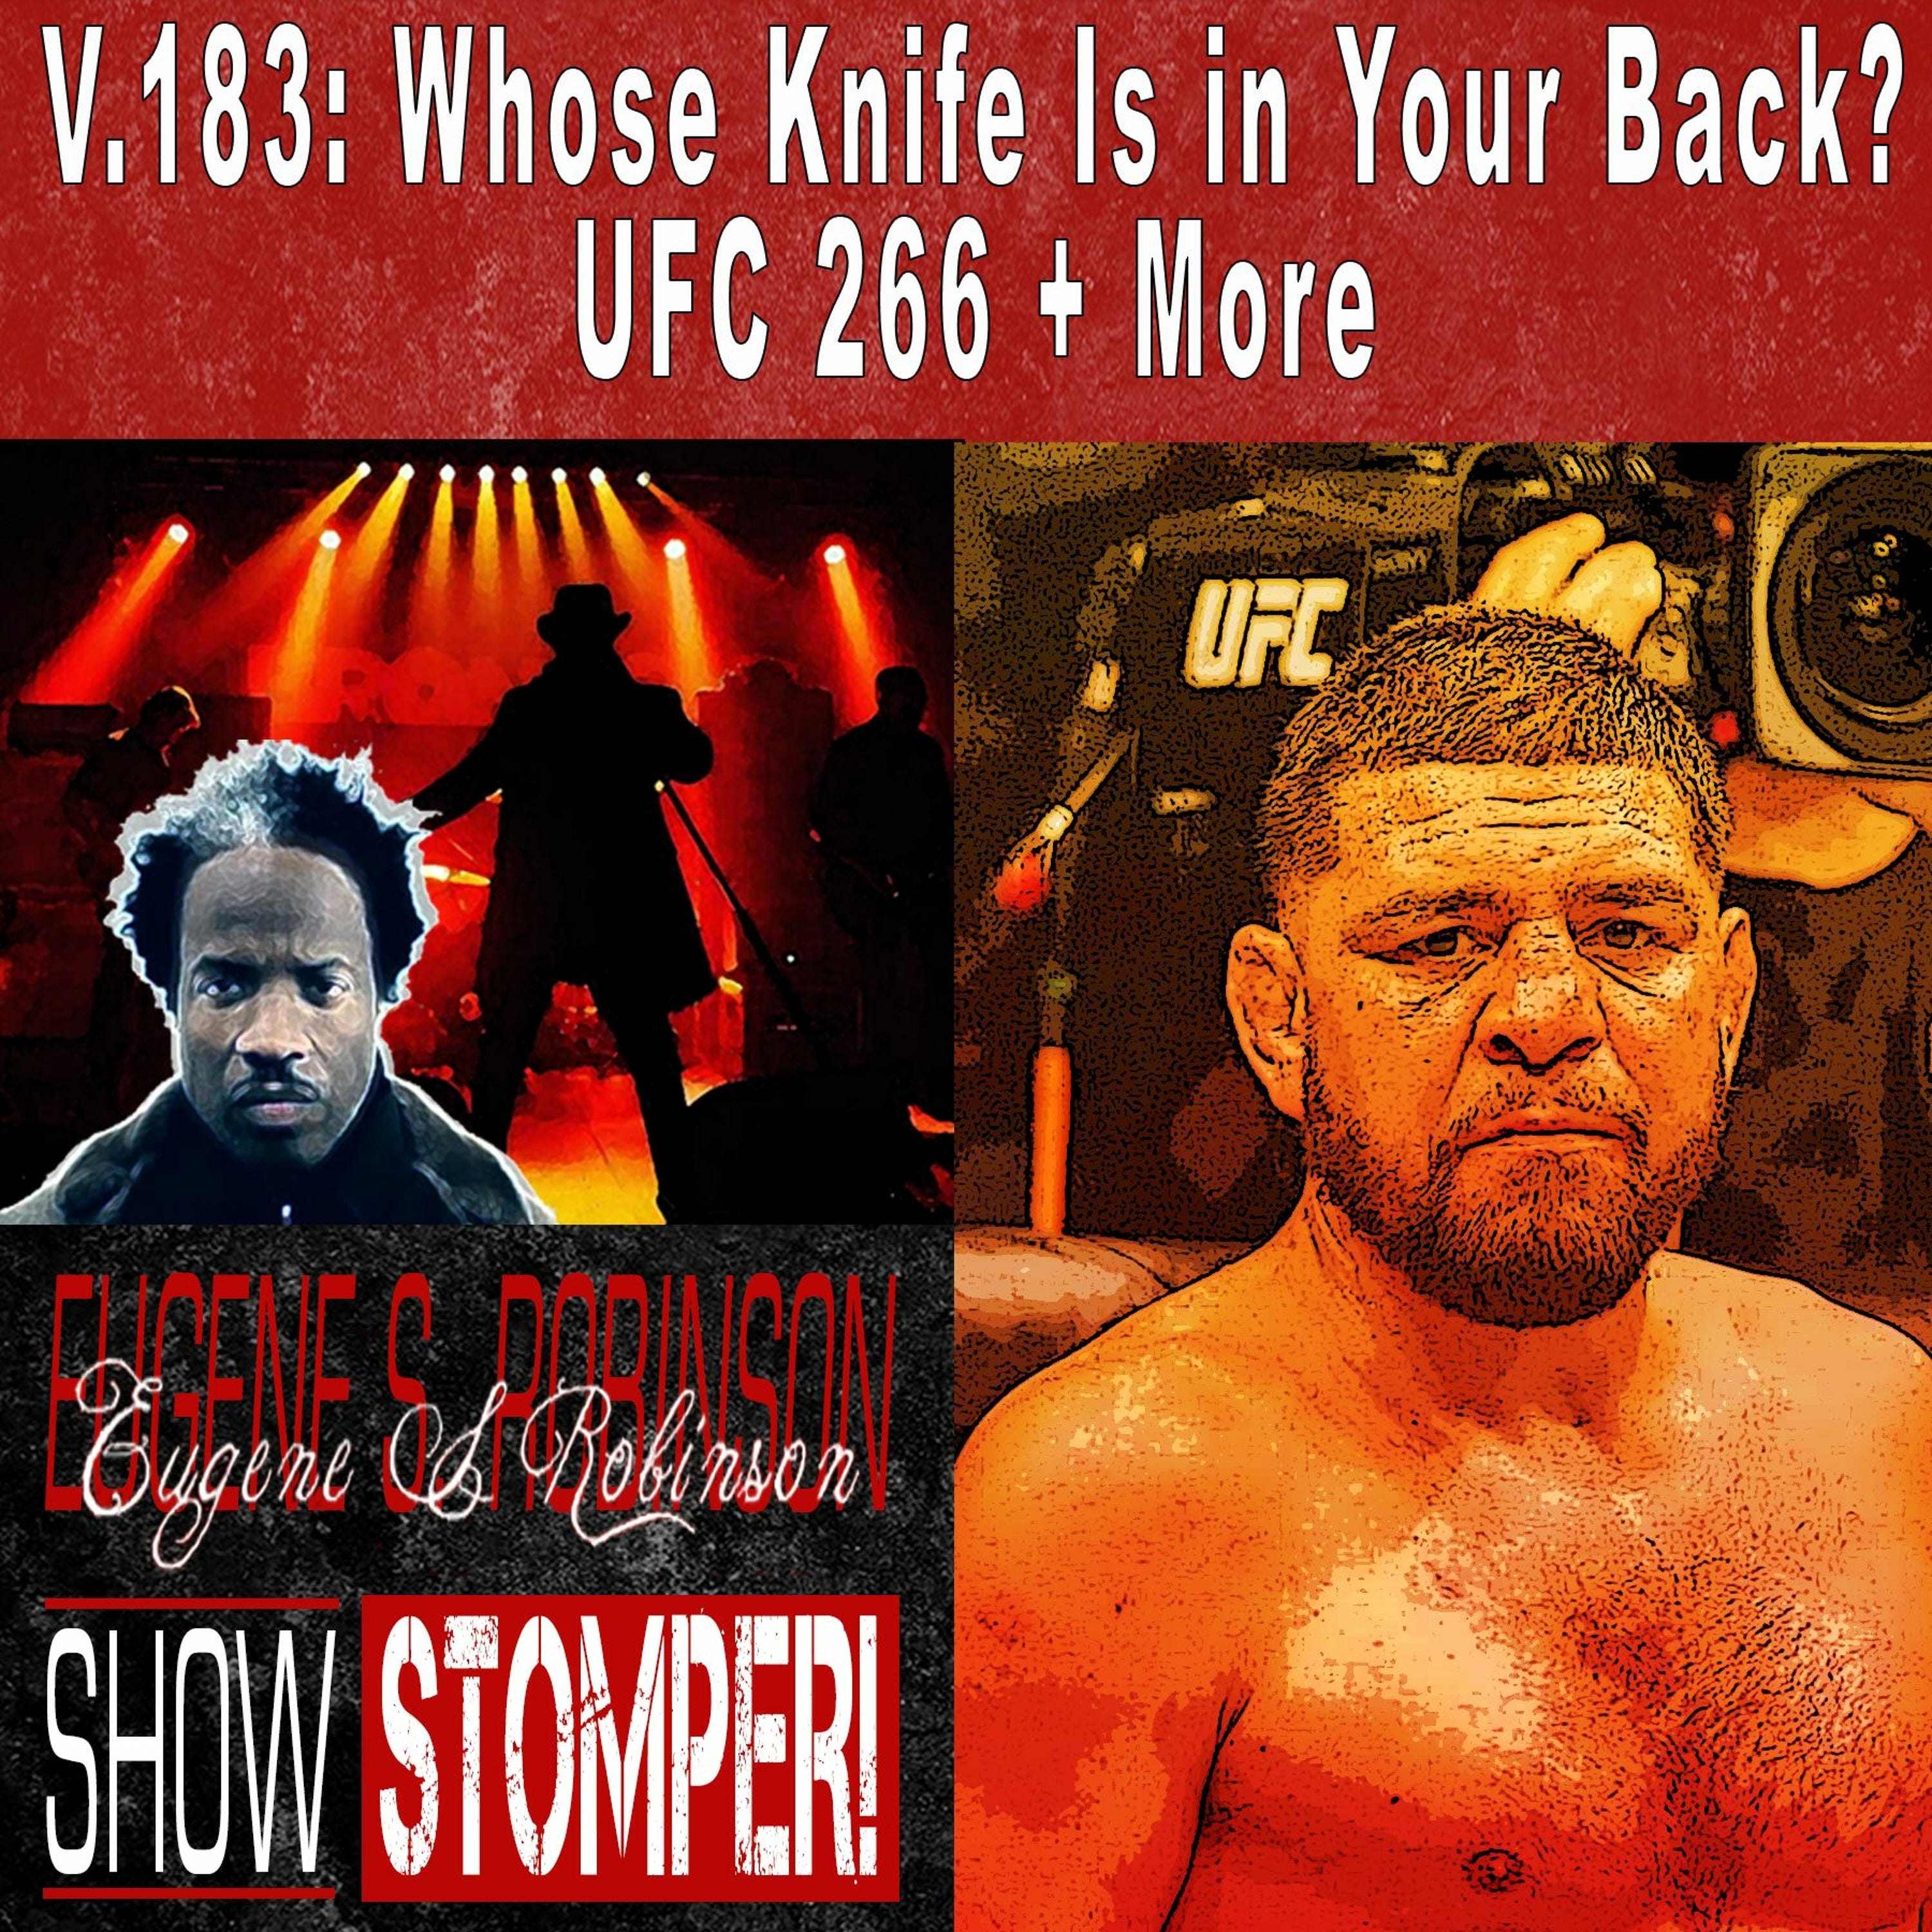 V.183 Whose Knife Is In Your Back? UFC 266 + More On The Eugene S. Robinson Show Stomper!